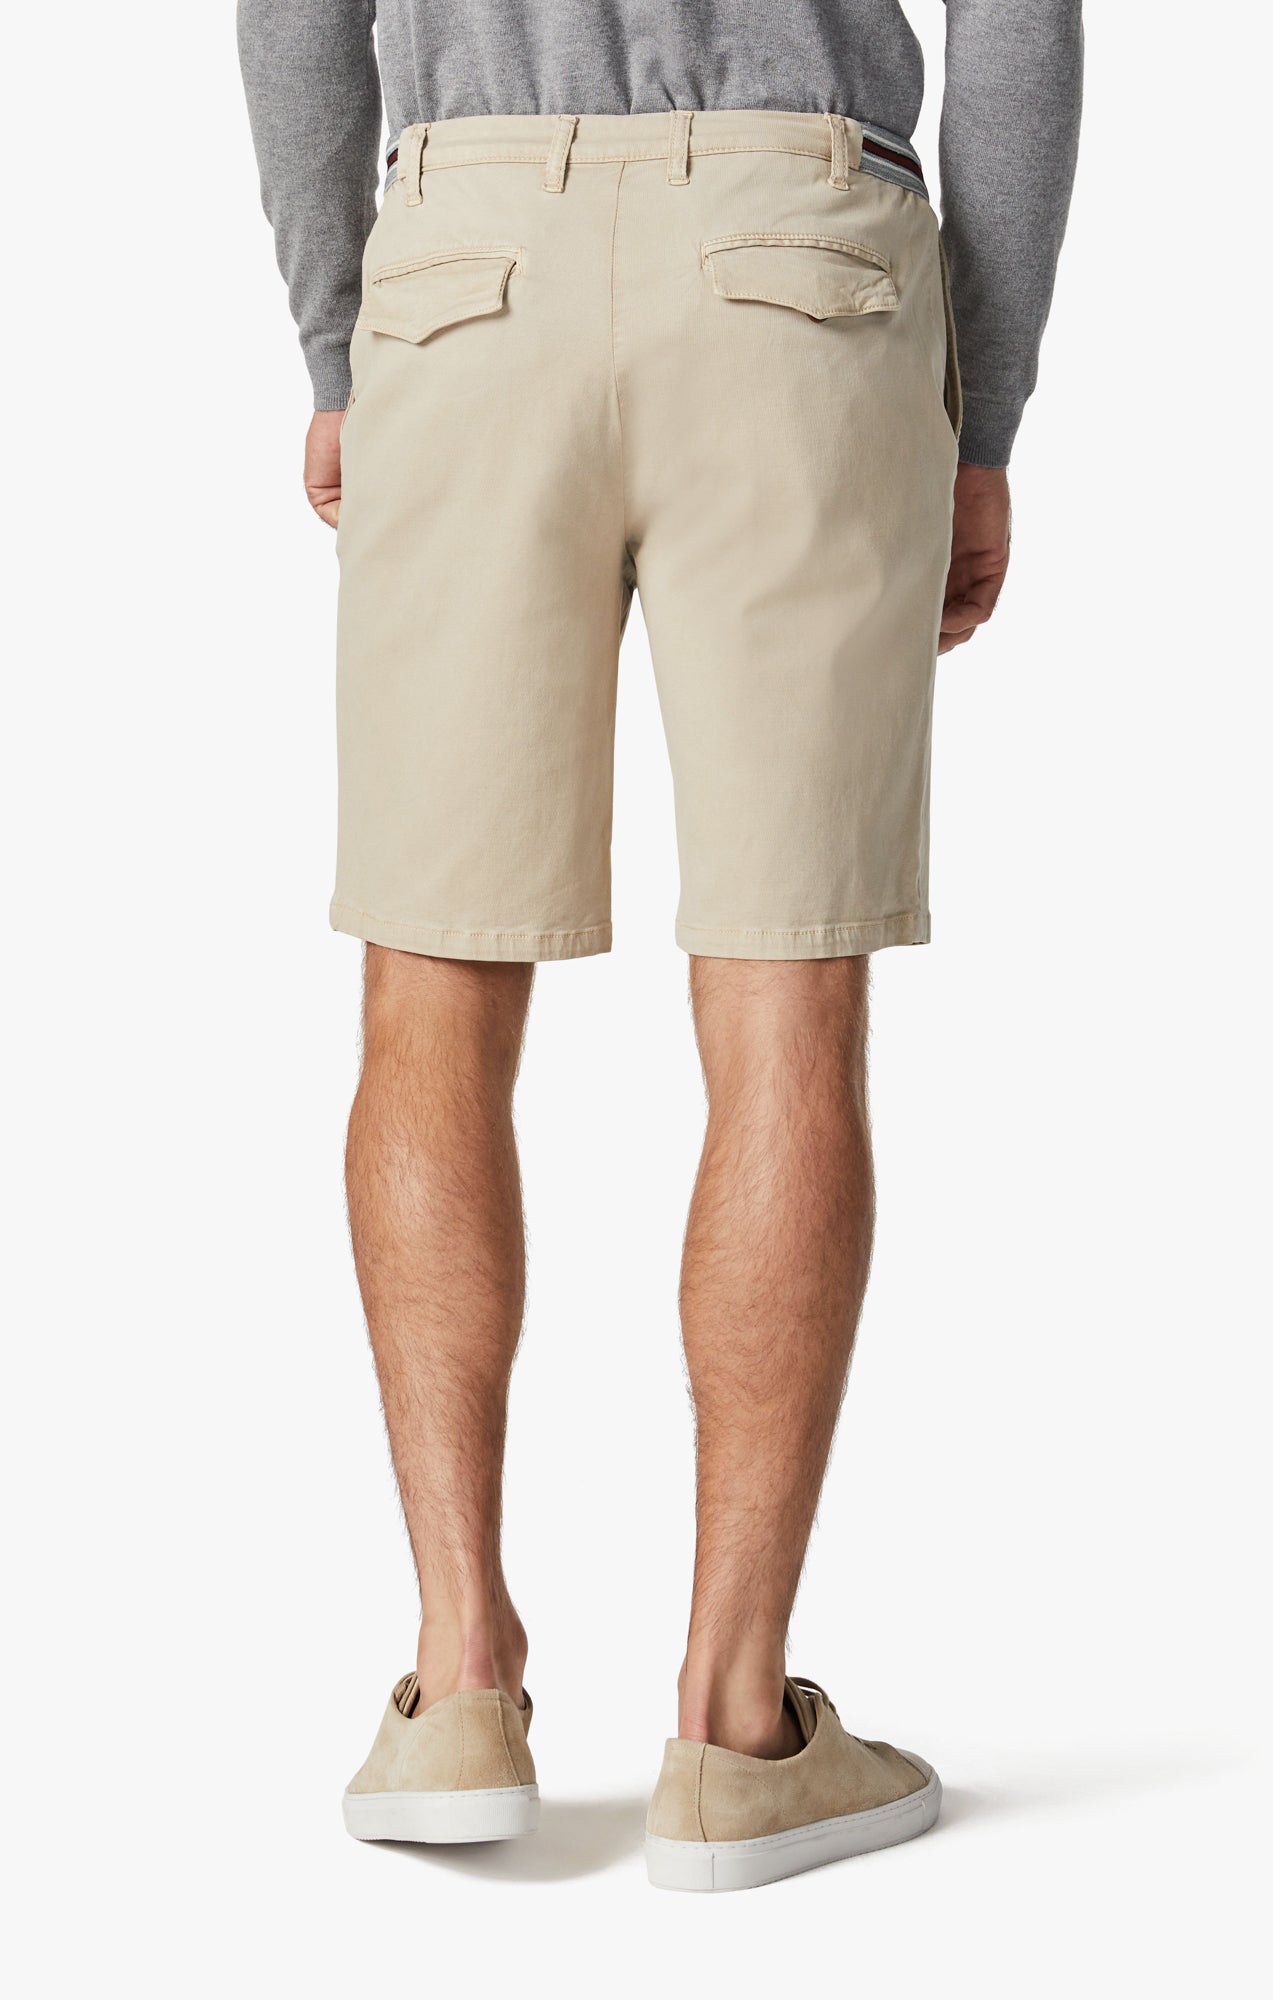 Ravenna Drawstring Shorts In Sand Soft Touch Image 4